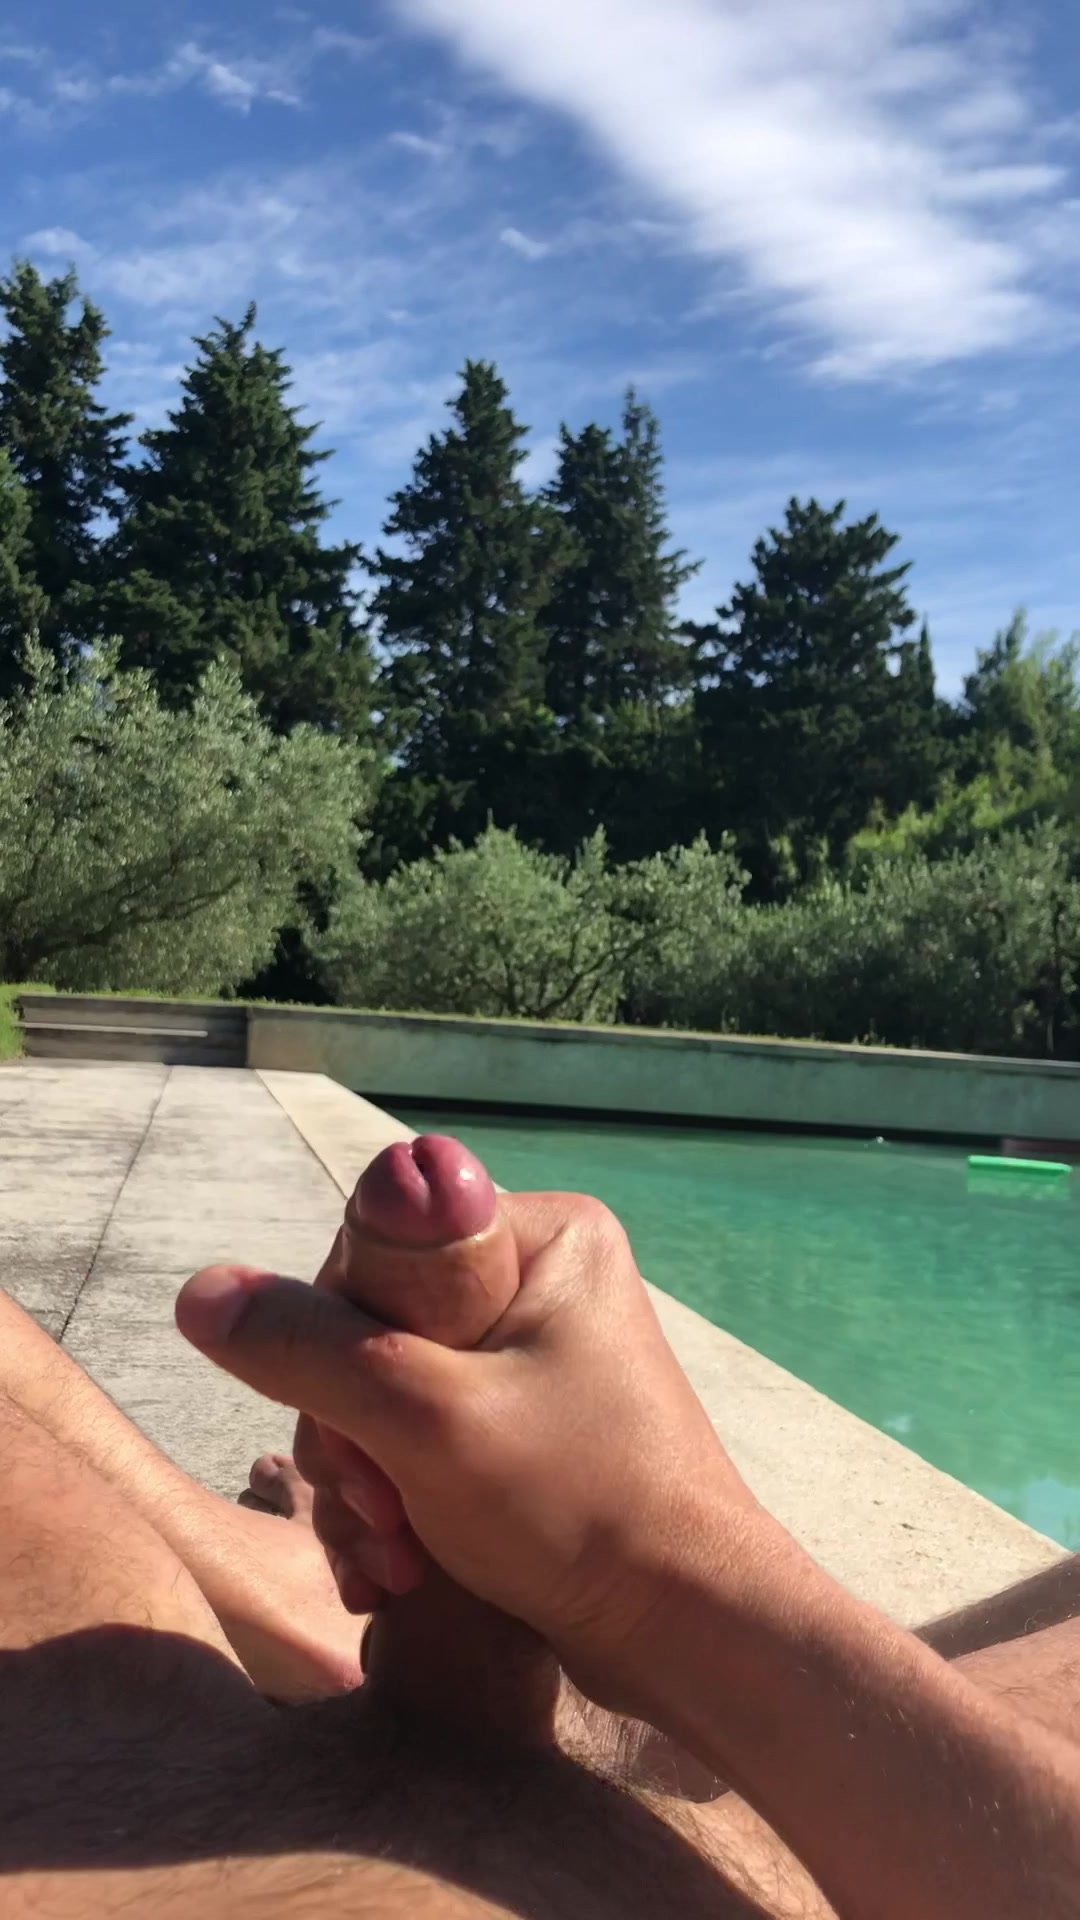 Wanking by the pool